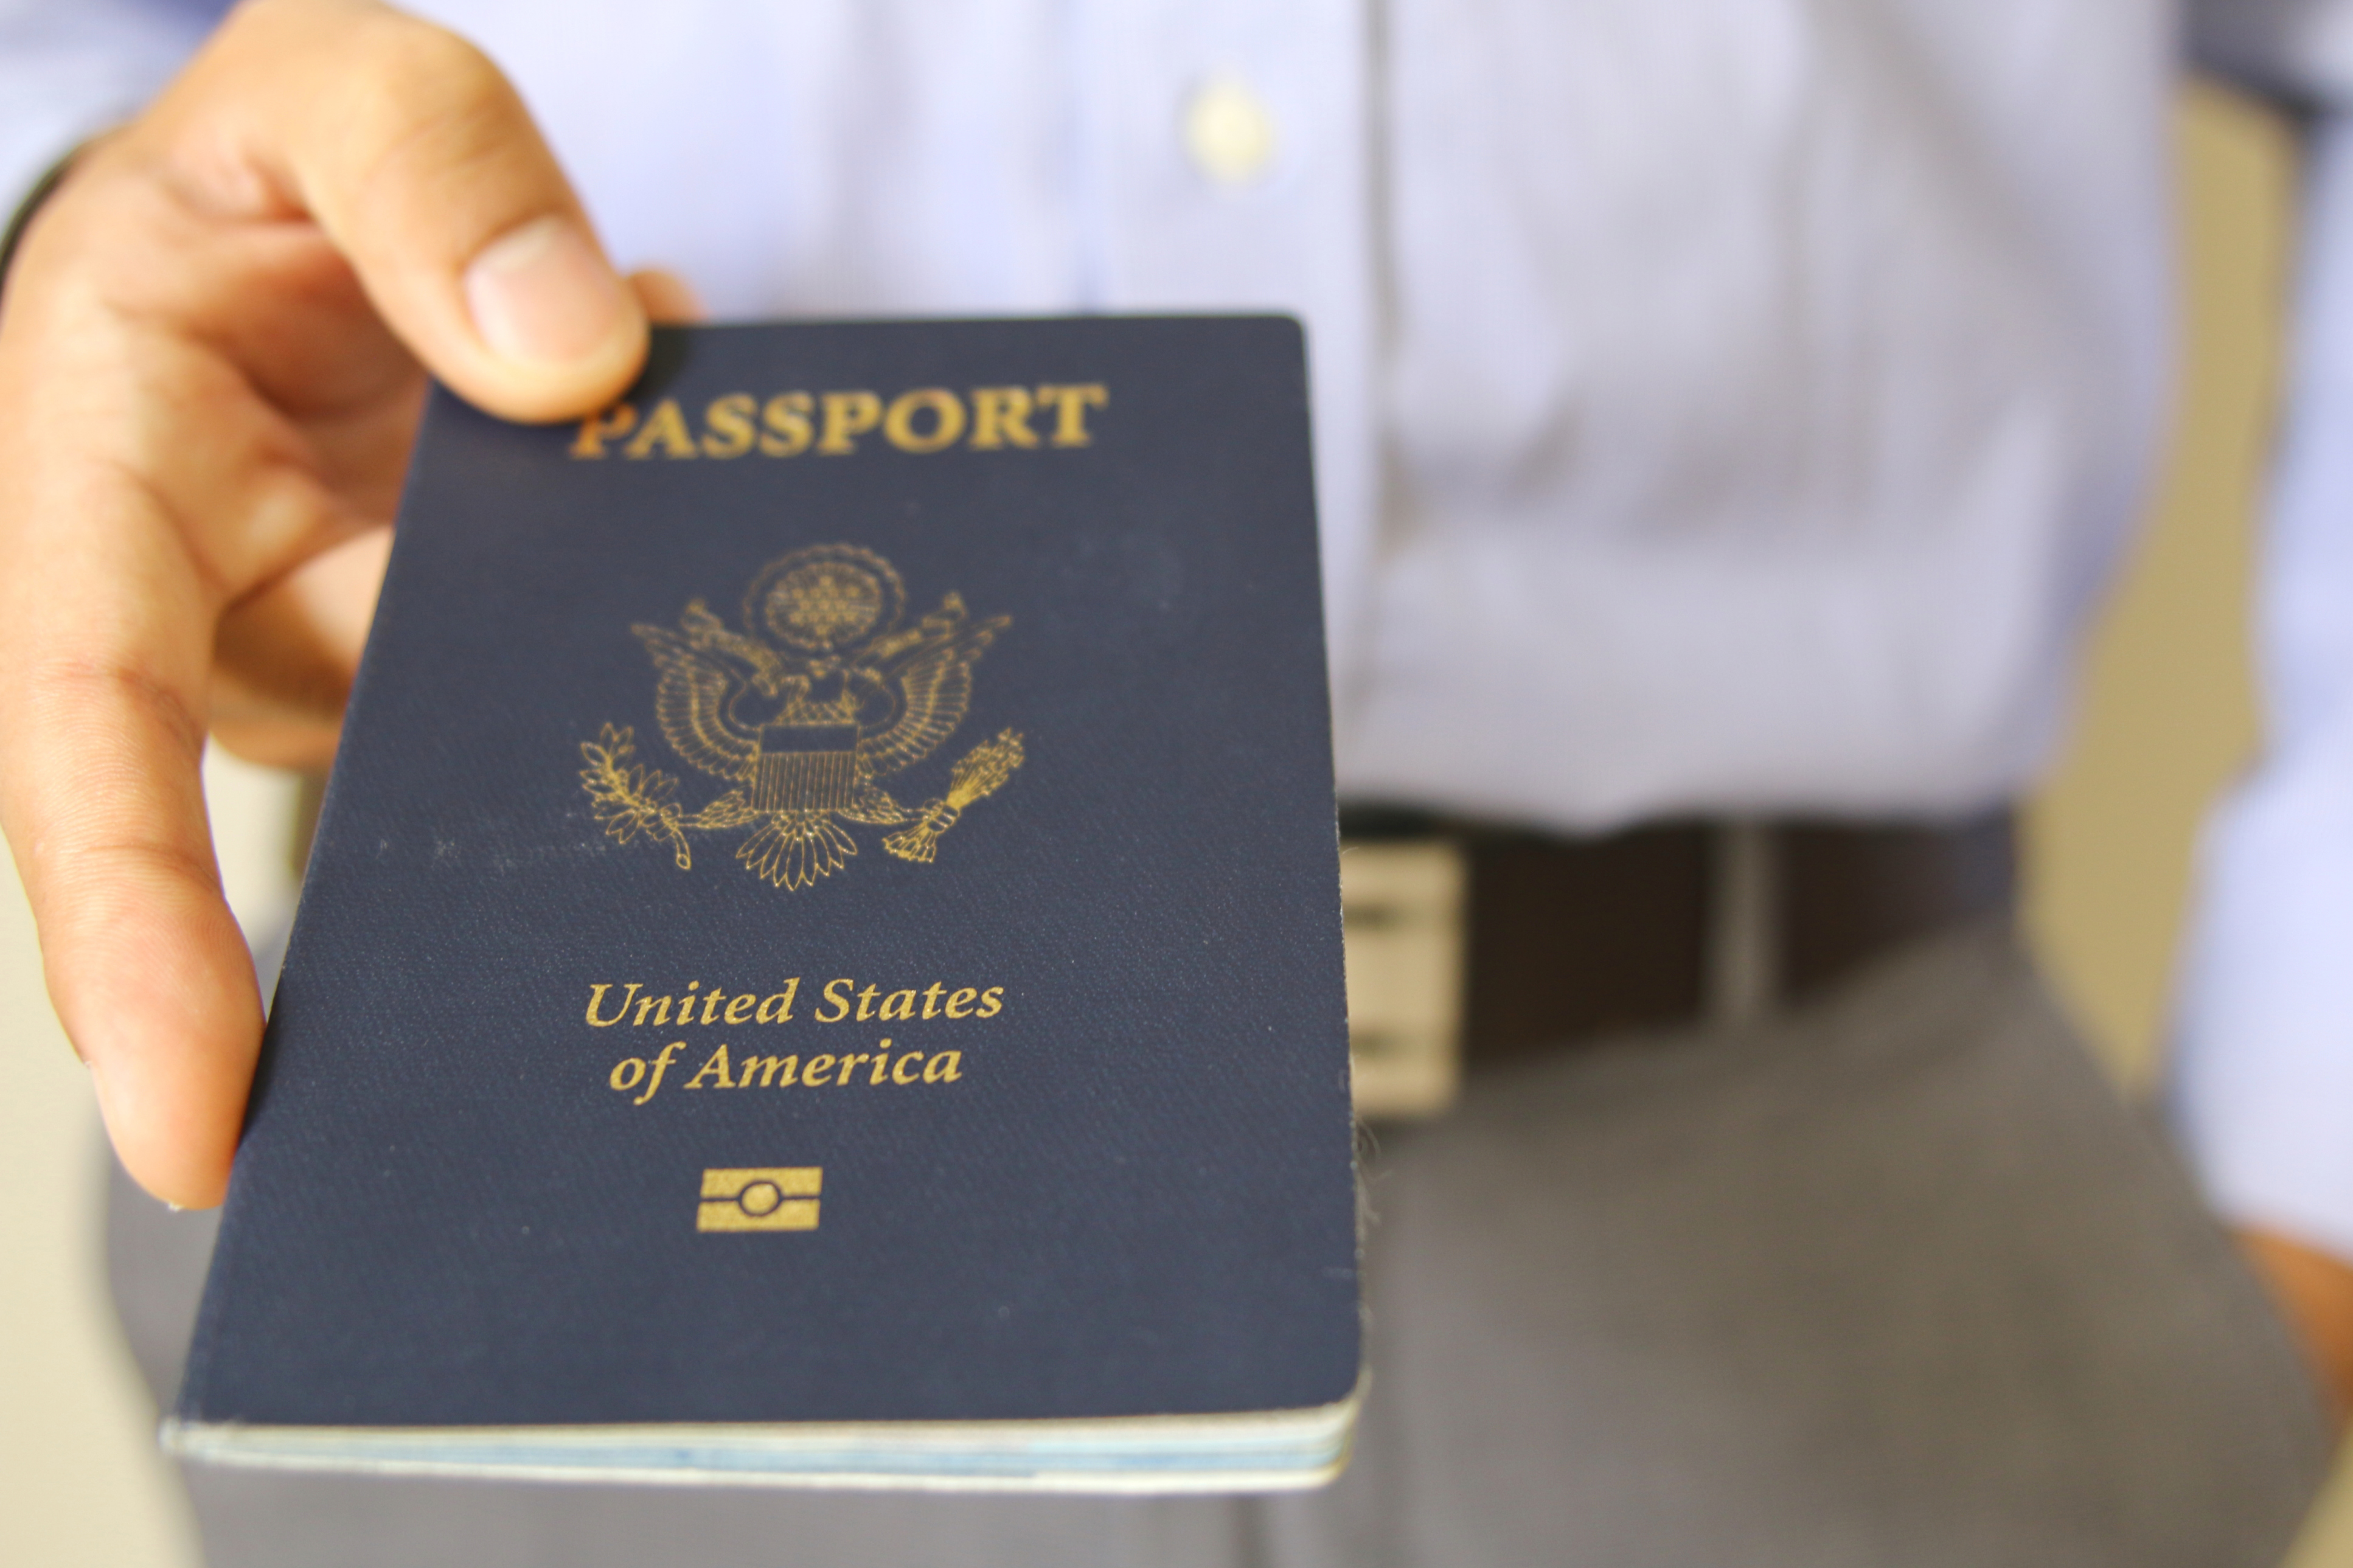 Here's how to apply for or renew your passport